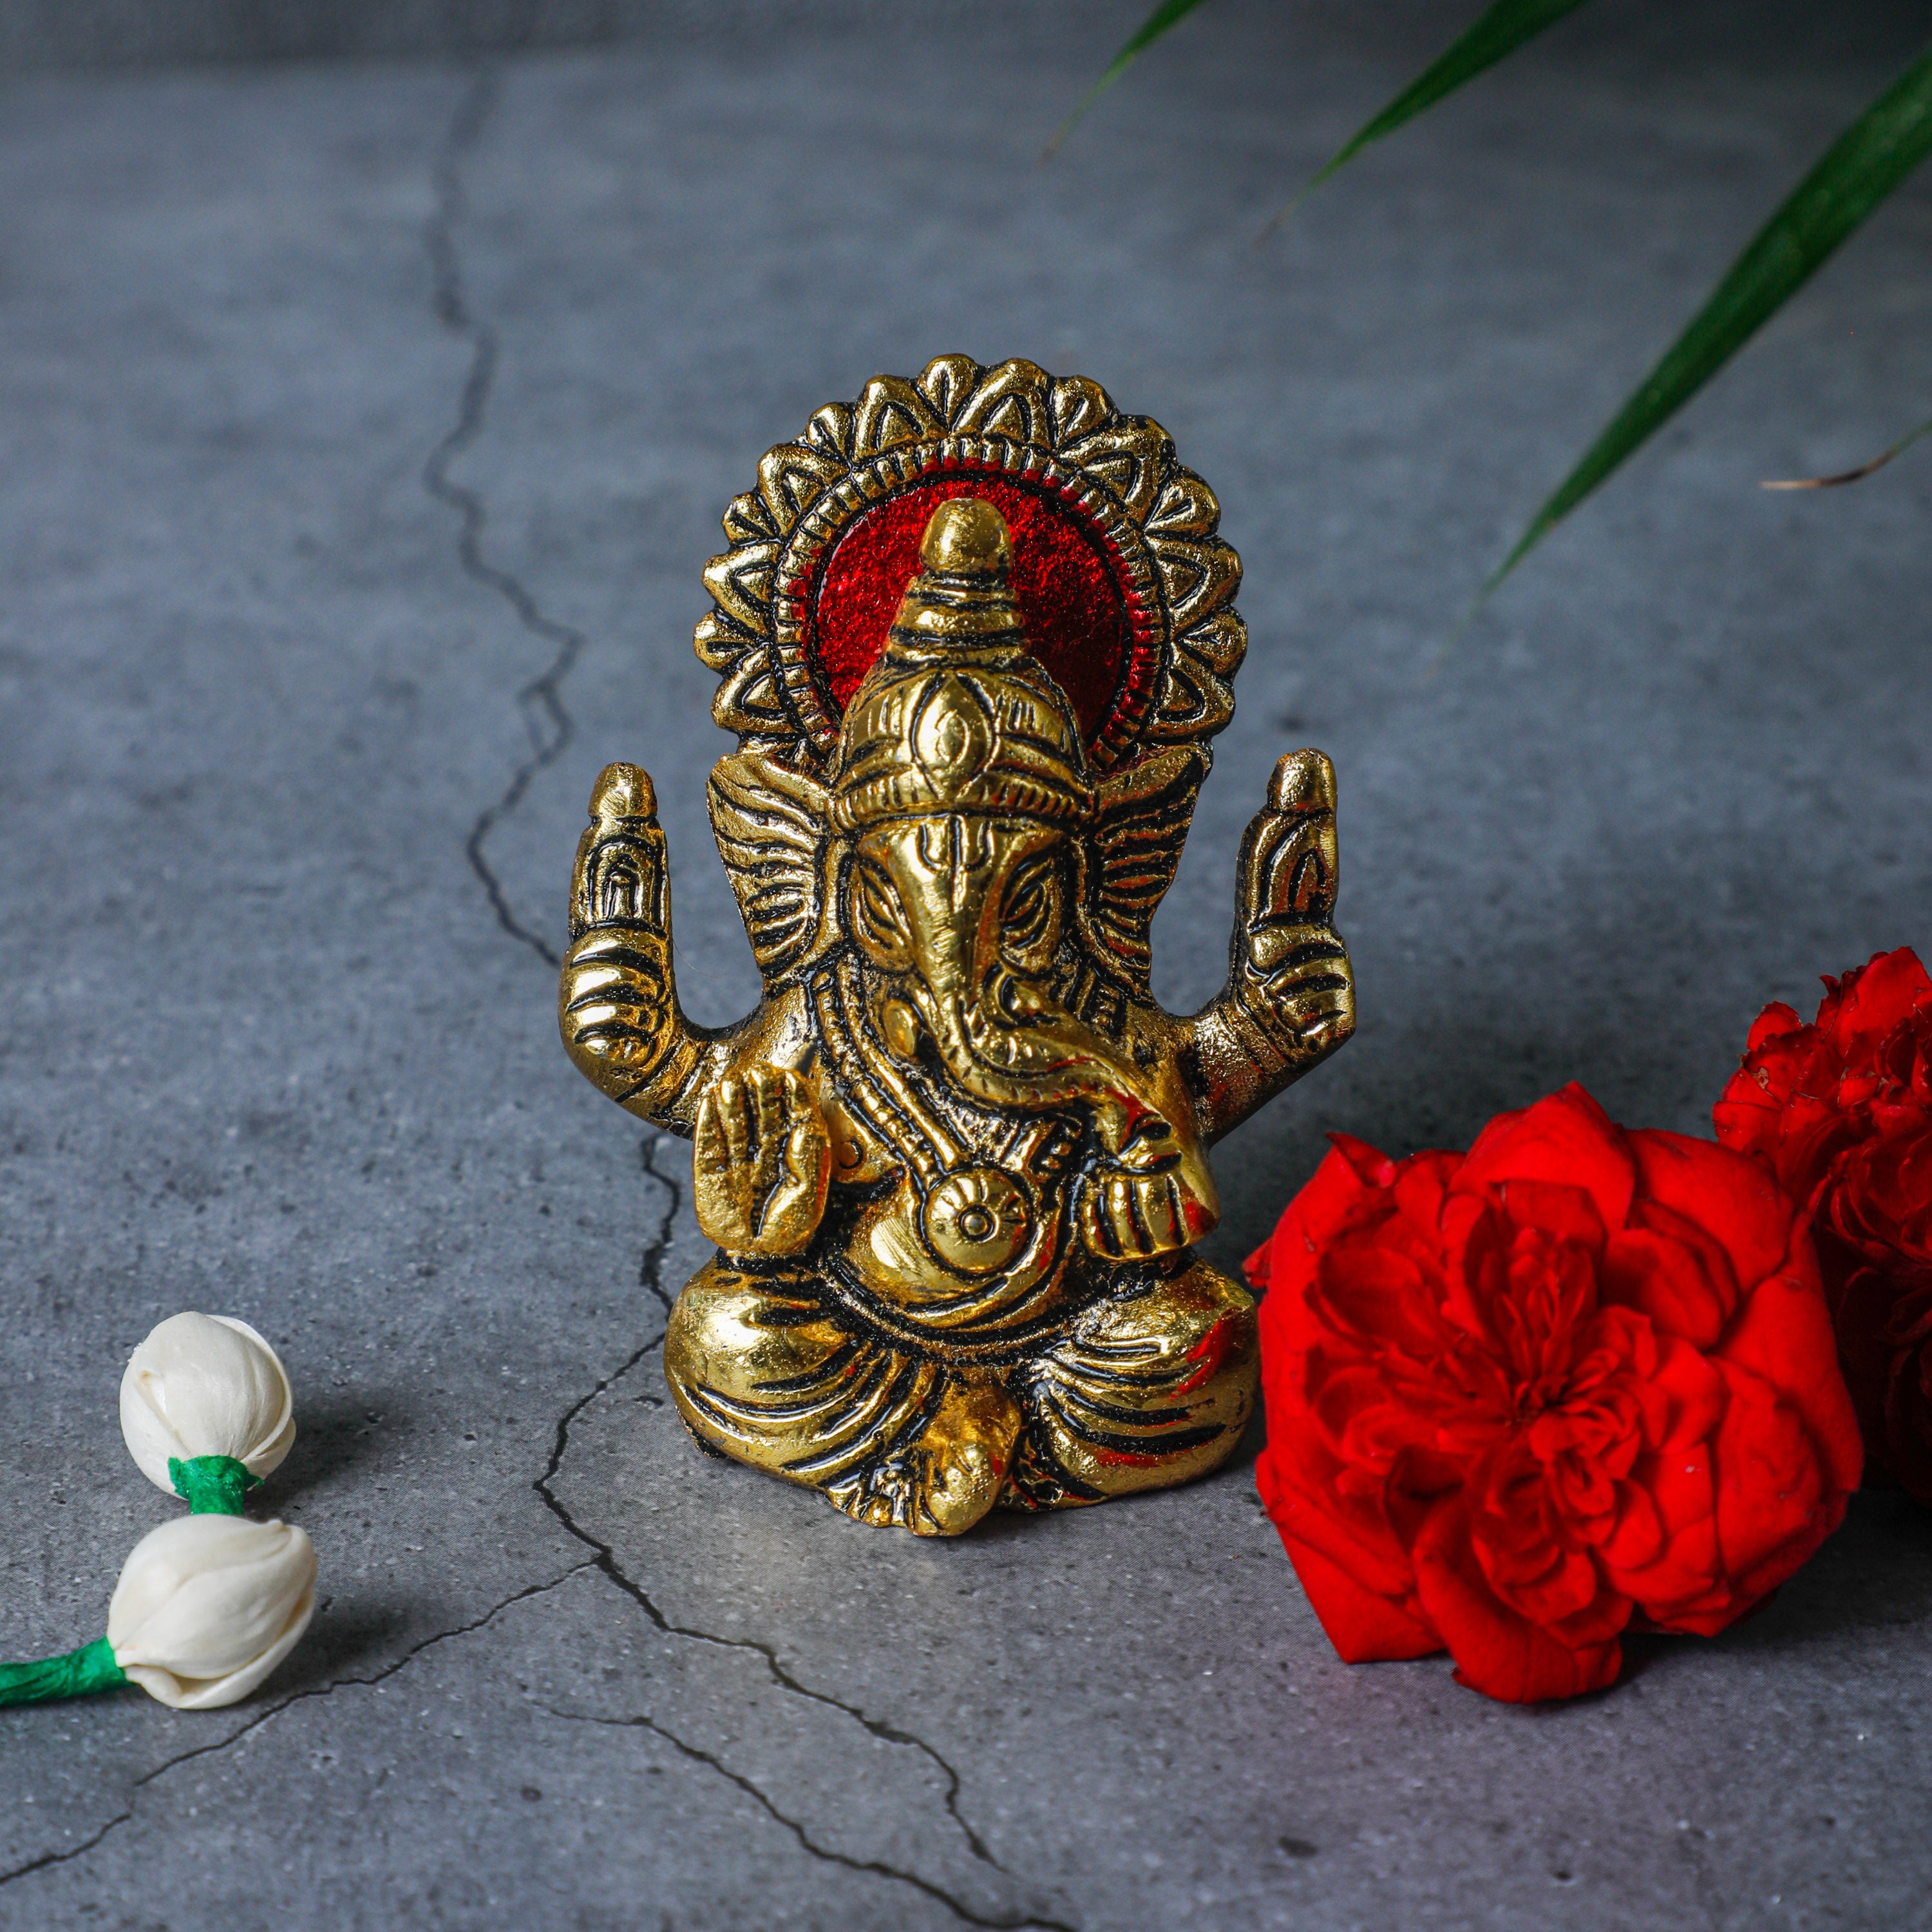 This statue of Lord Ganesha will bring prosperity and good luck to your home